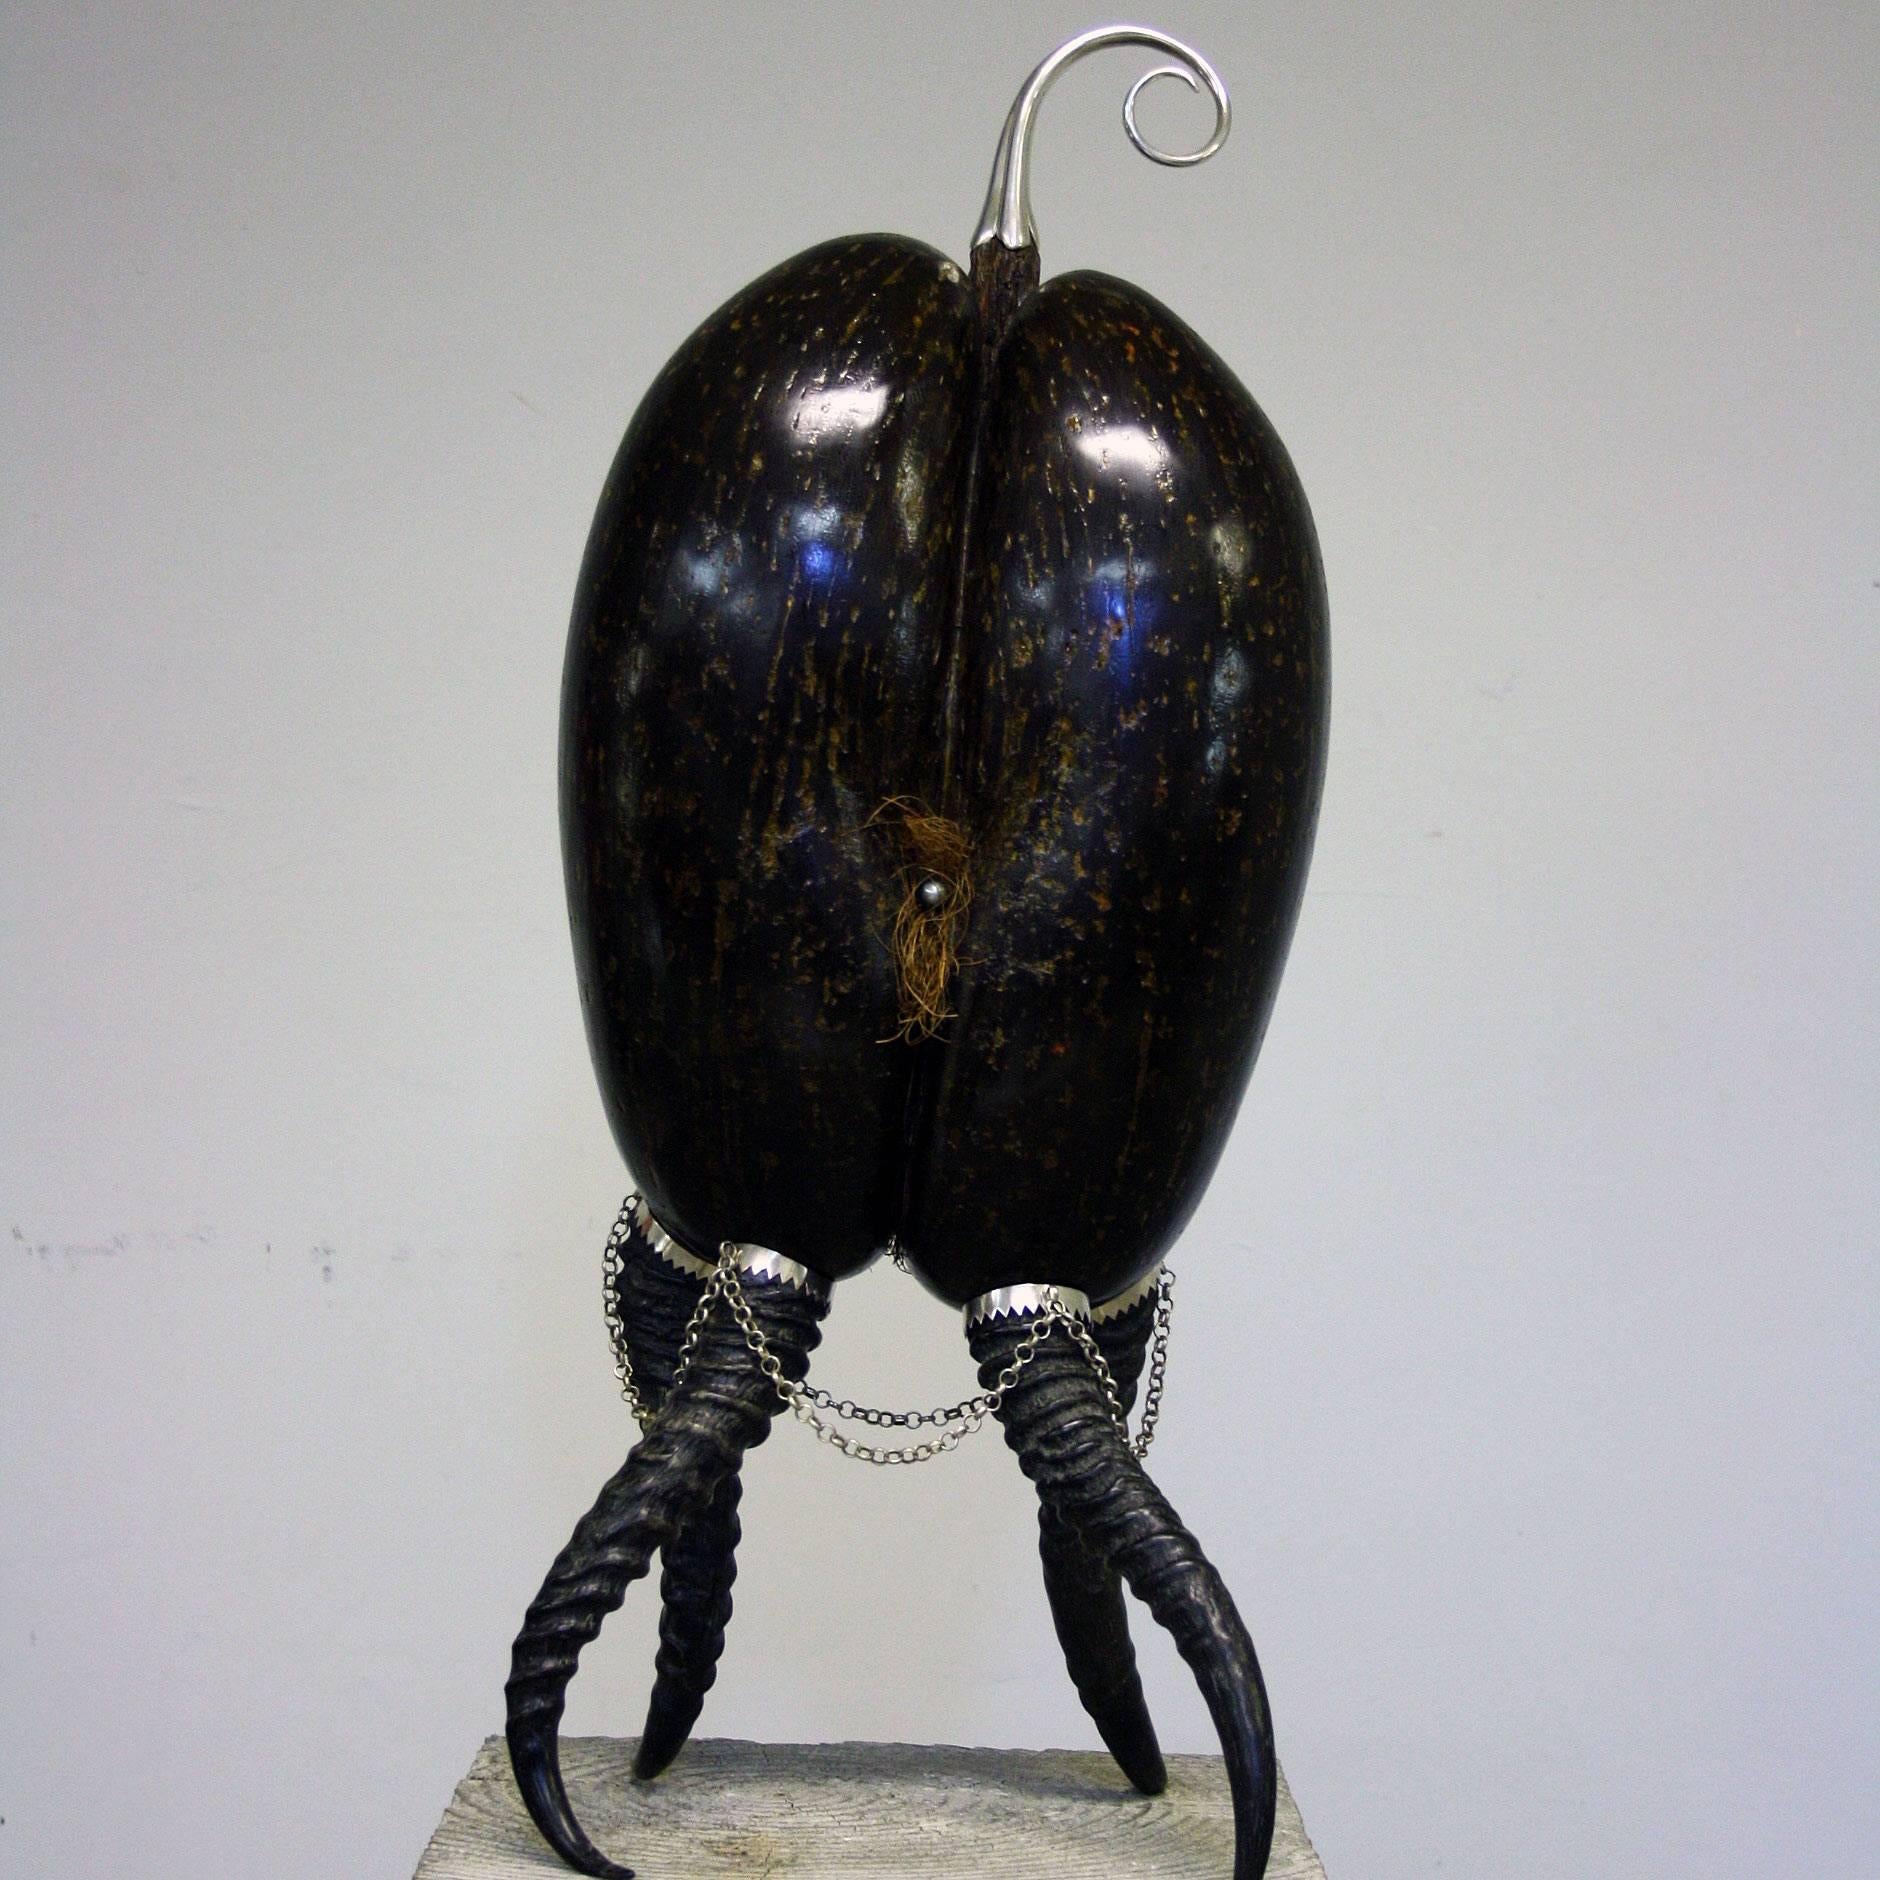 A Coco De Mer sculpture by Glyn Lockett with silvered brass stem, the pudendum set with a black south sea pearl on chain hung silver mounted antelope horn feet, with maker's silver monogram.

This is a fantastic opportunity to start collecting at